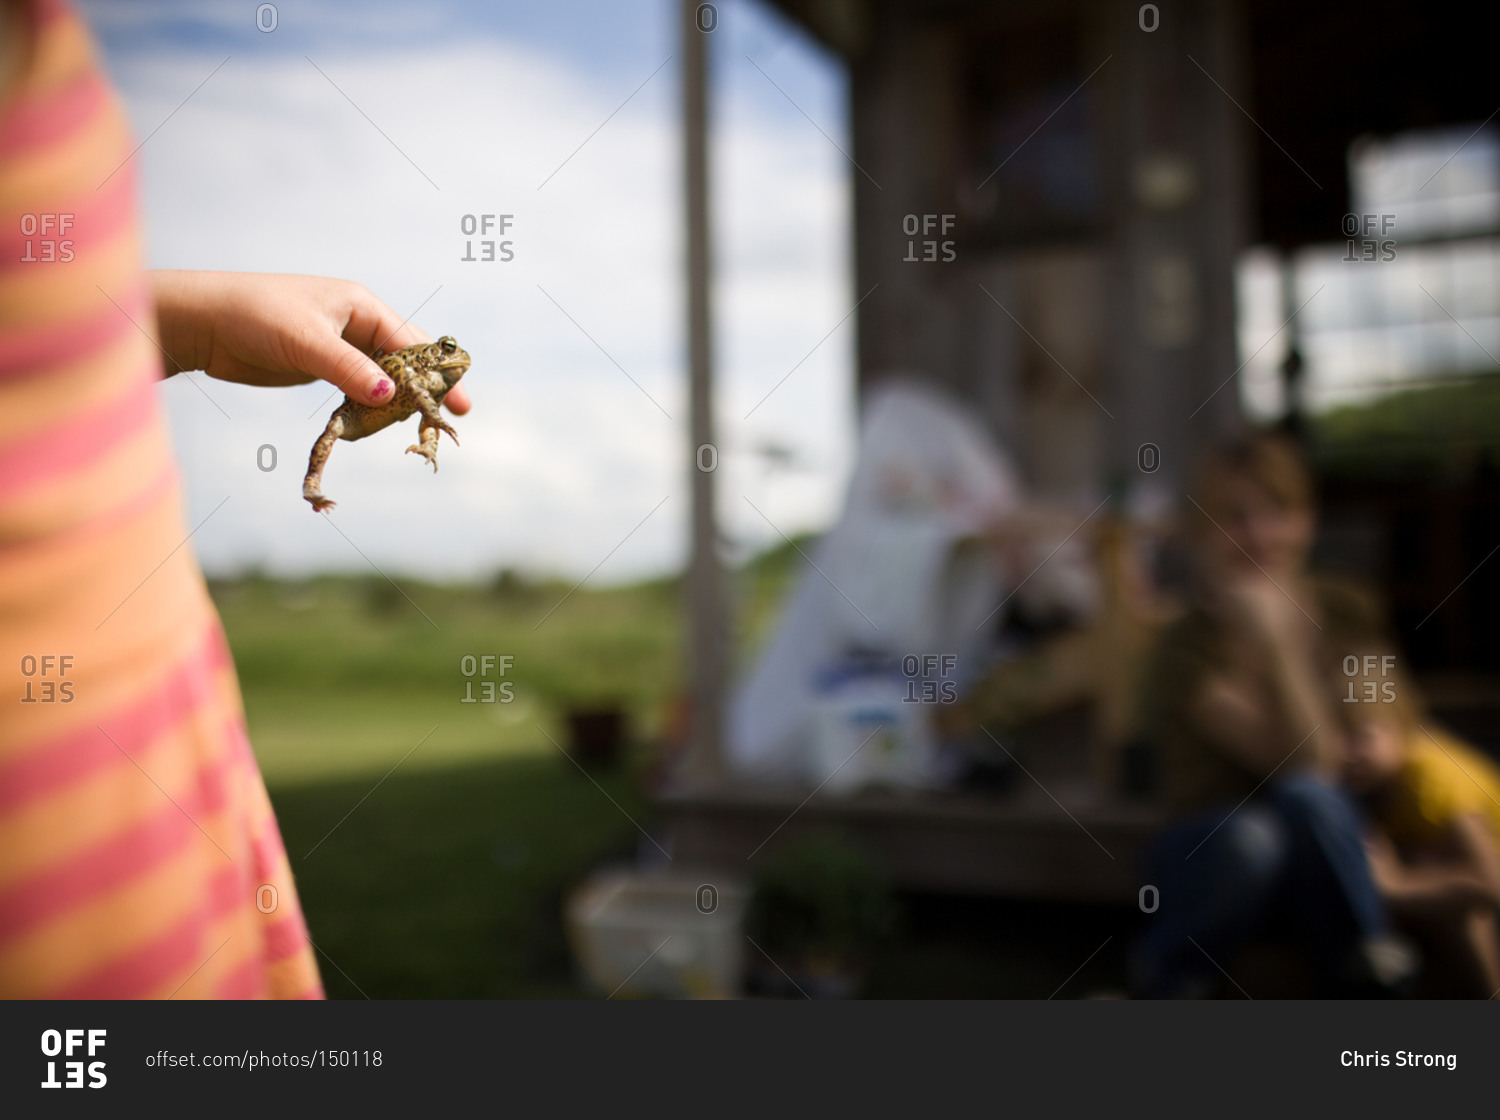 Girl holding a frog near rural house